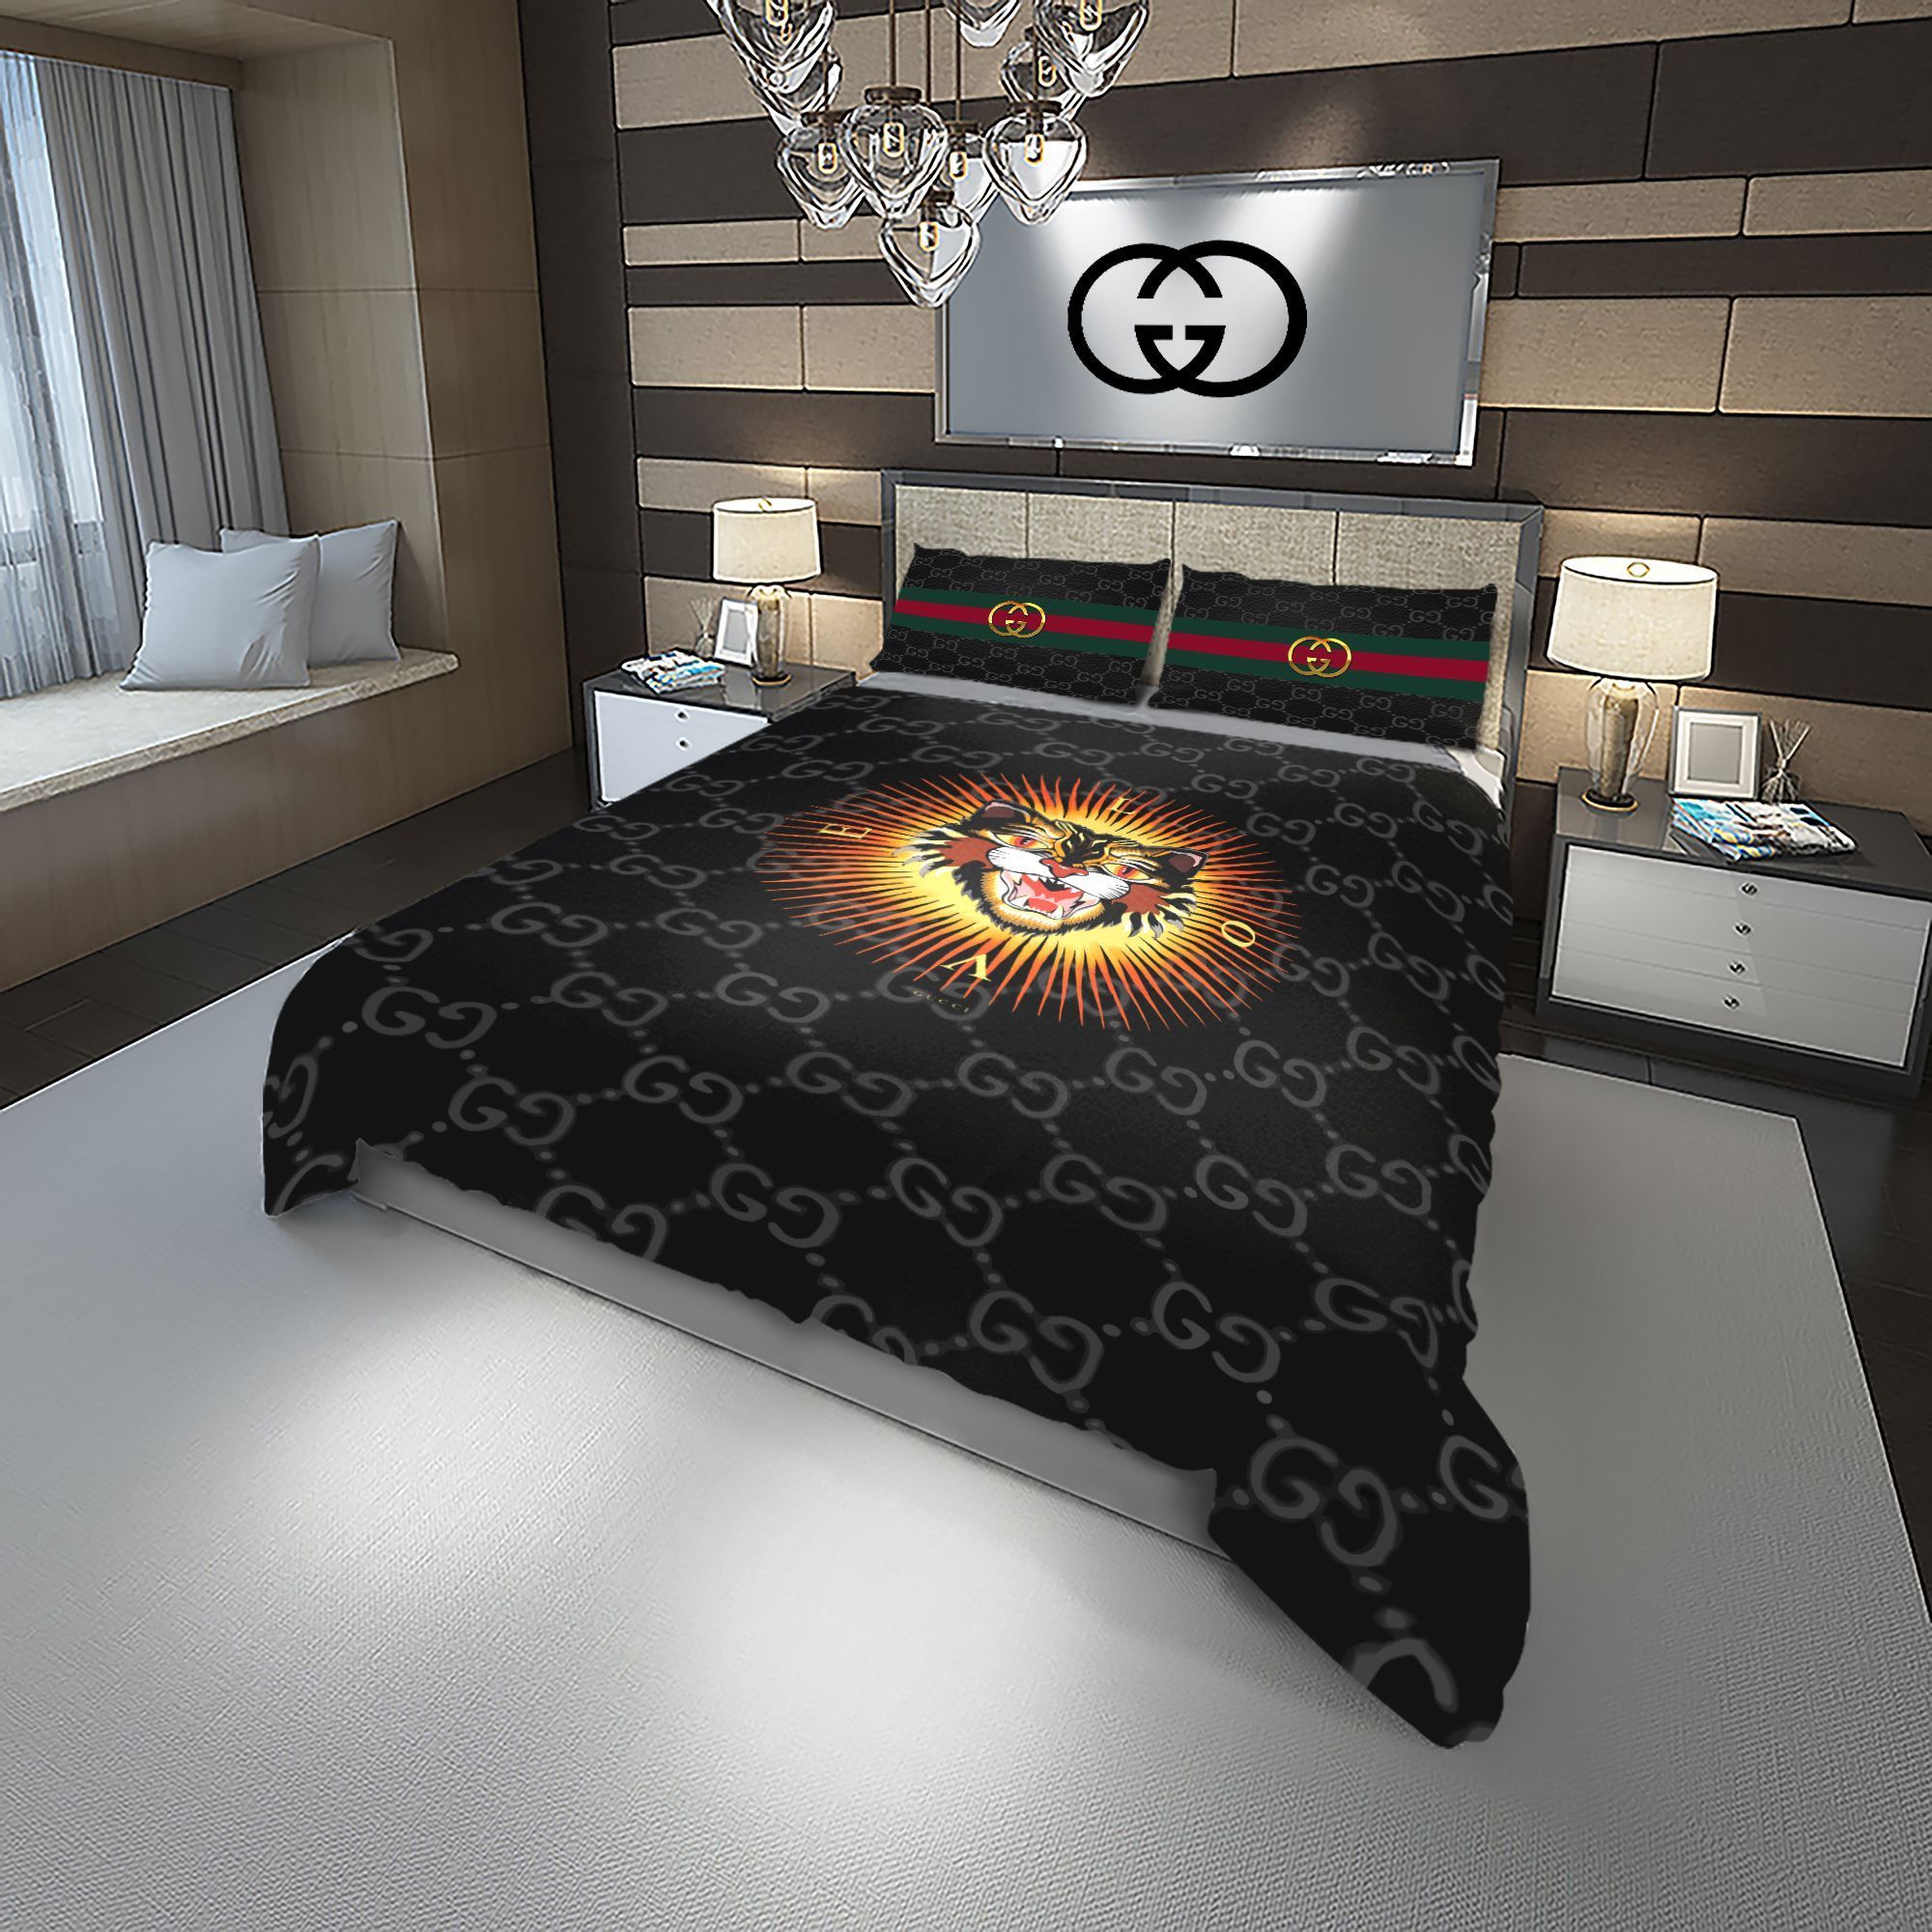 Let me show you about some luxury brand bedding set 2022 107